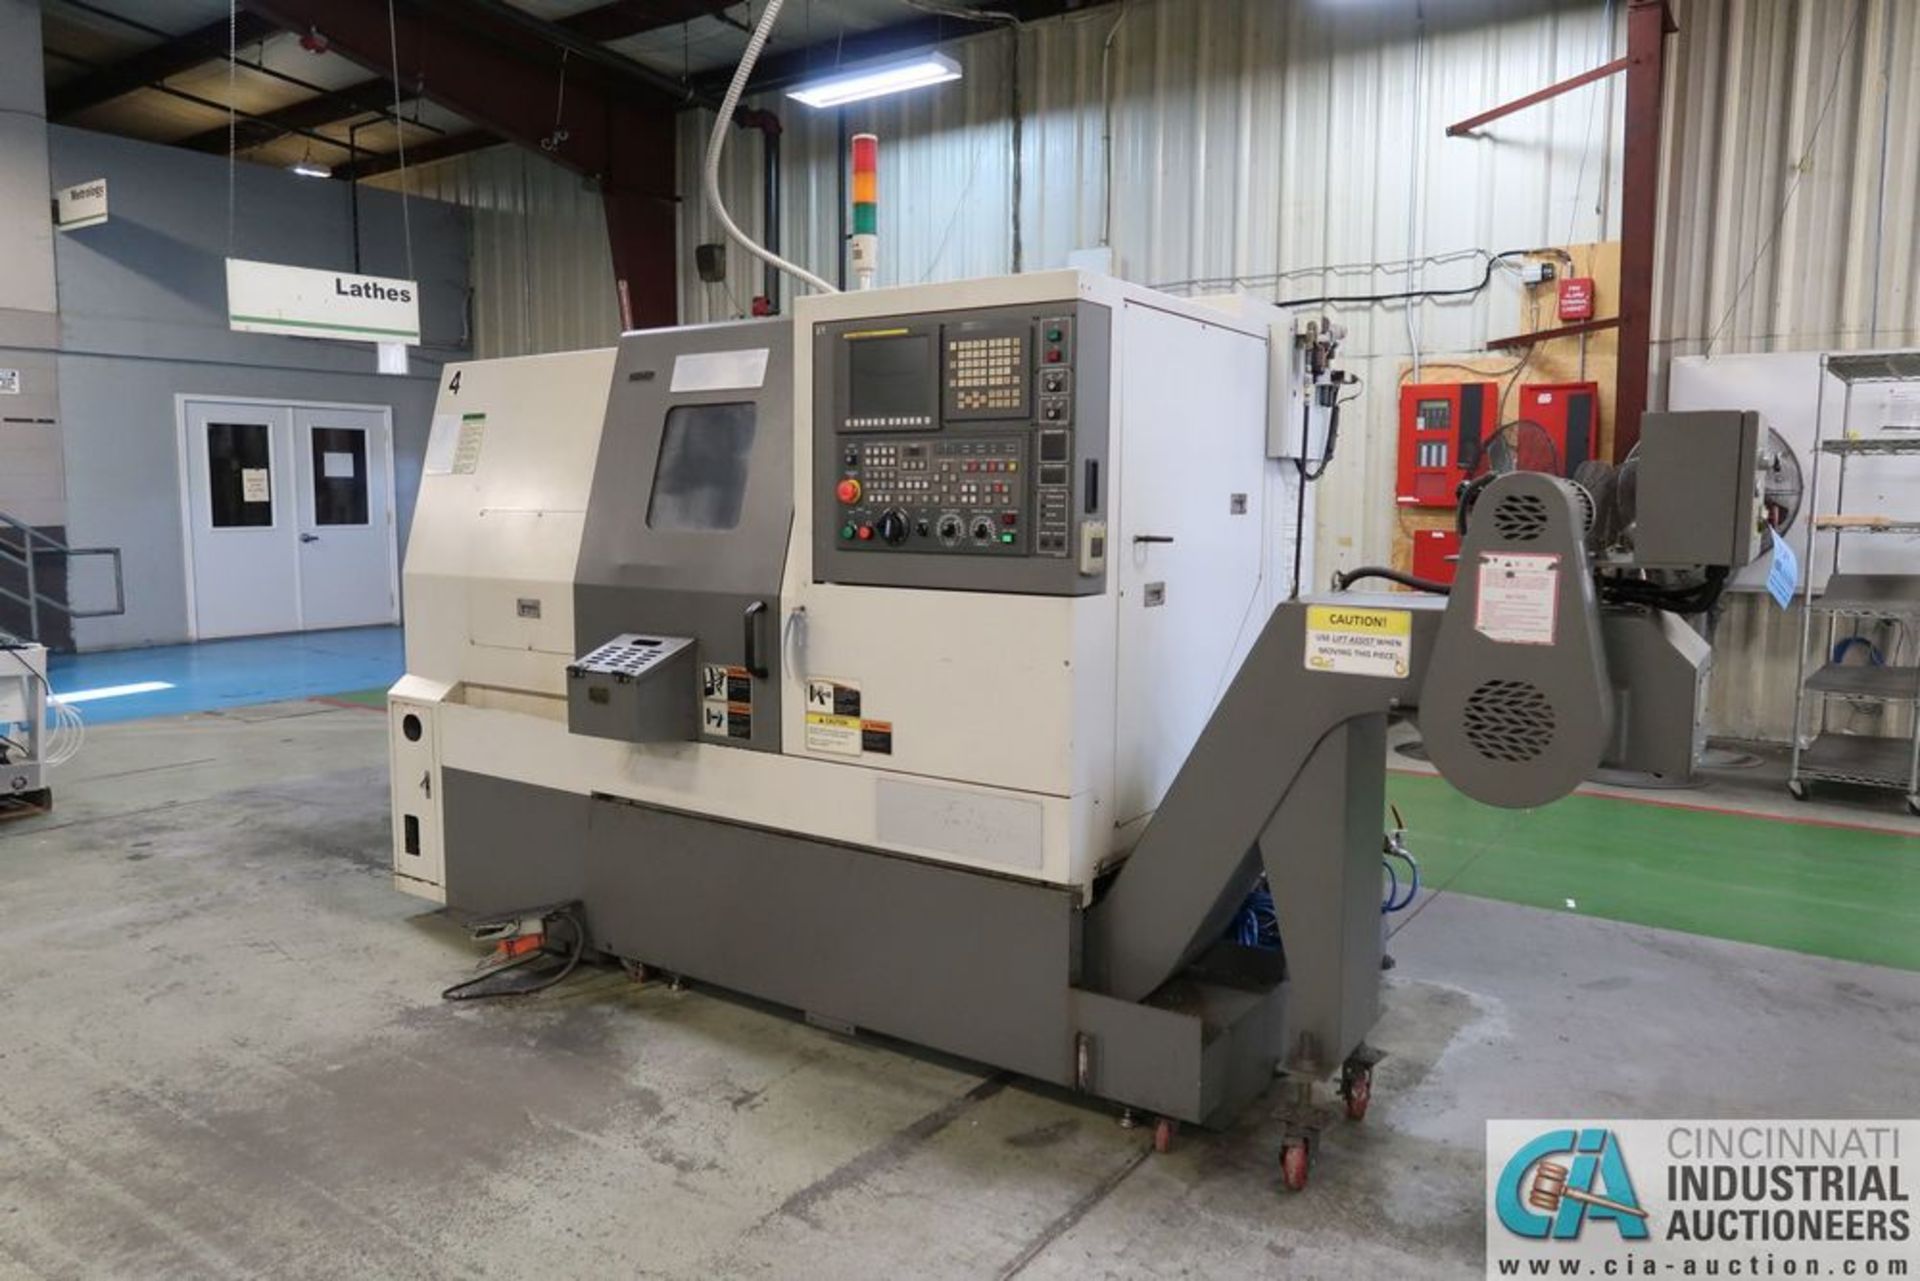 SAMSUNG SL20/500 CNC TURNING CENTER; S/N 12H440853, 8" 3-JAW CHUCK, **Rigging Fee Due $500.00**